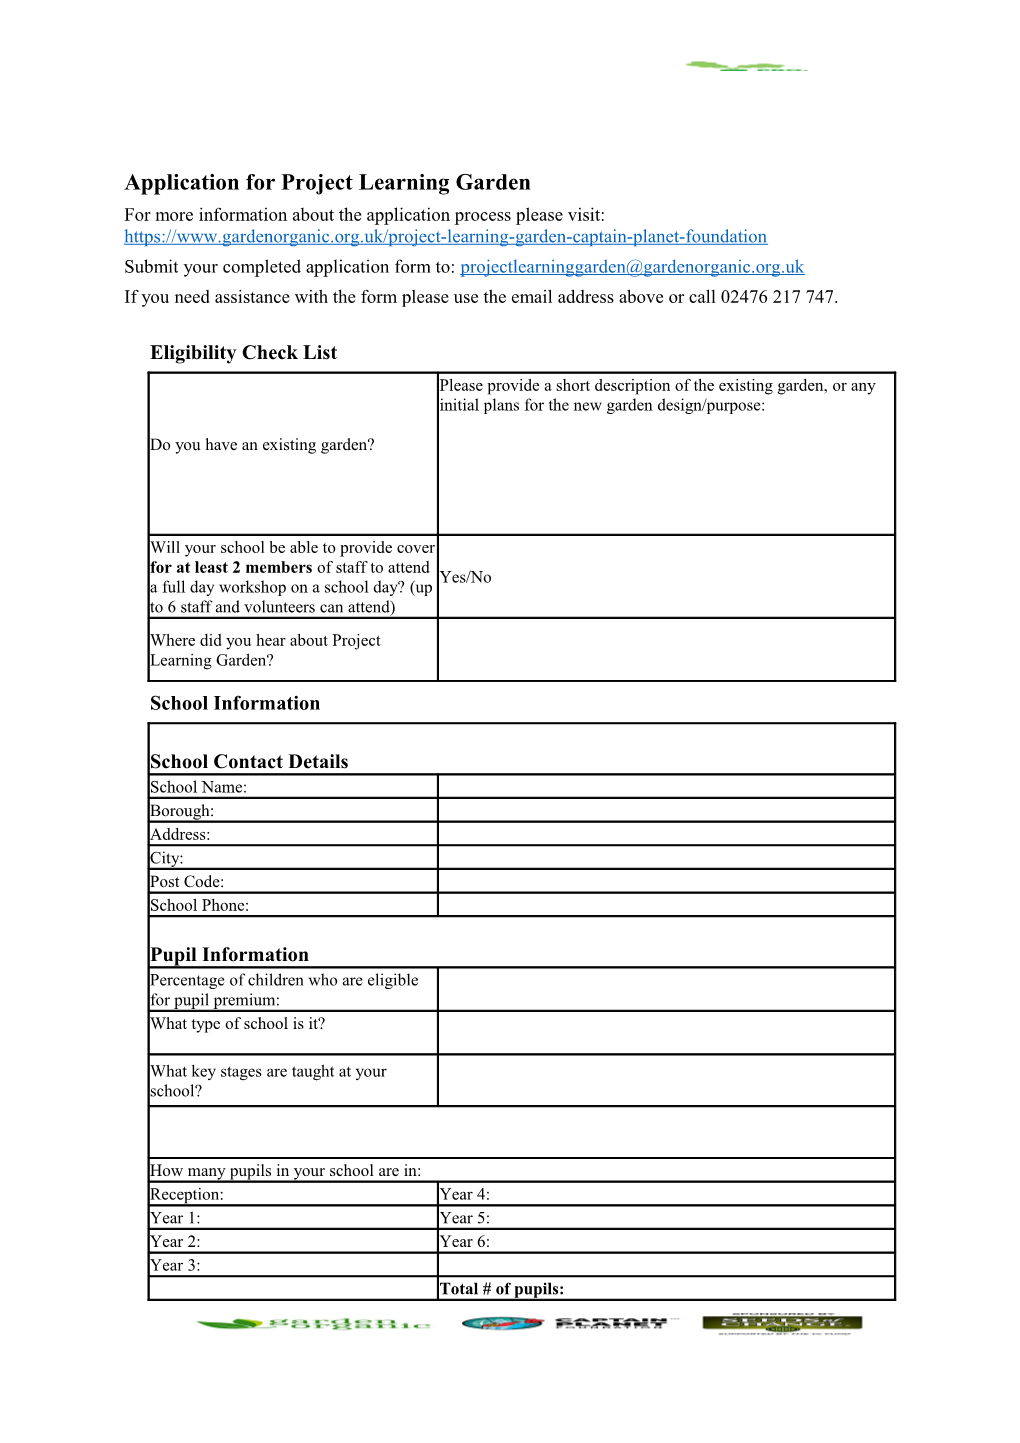 Application for Project Learning Garden